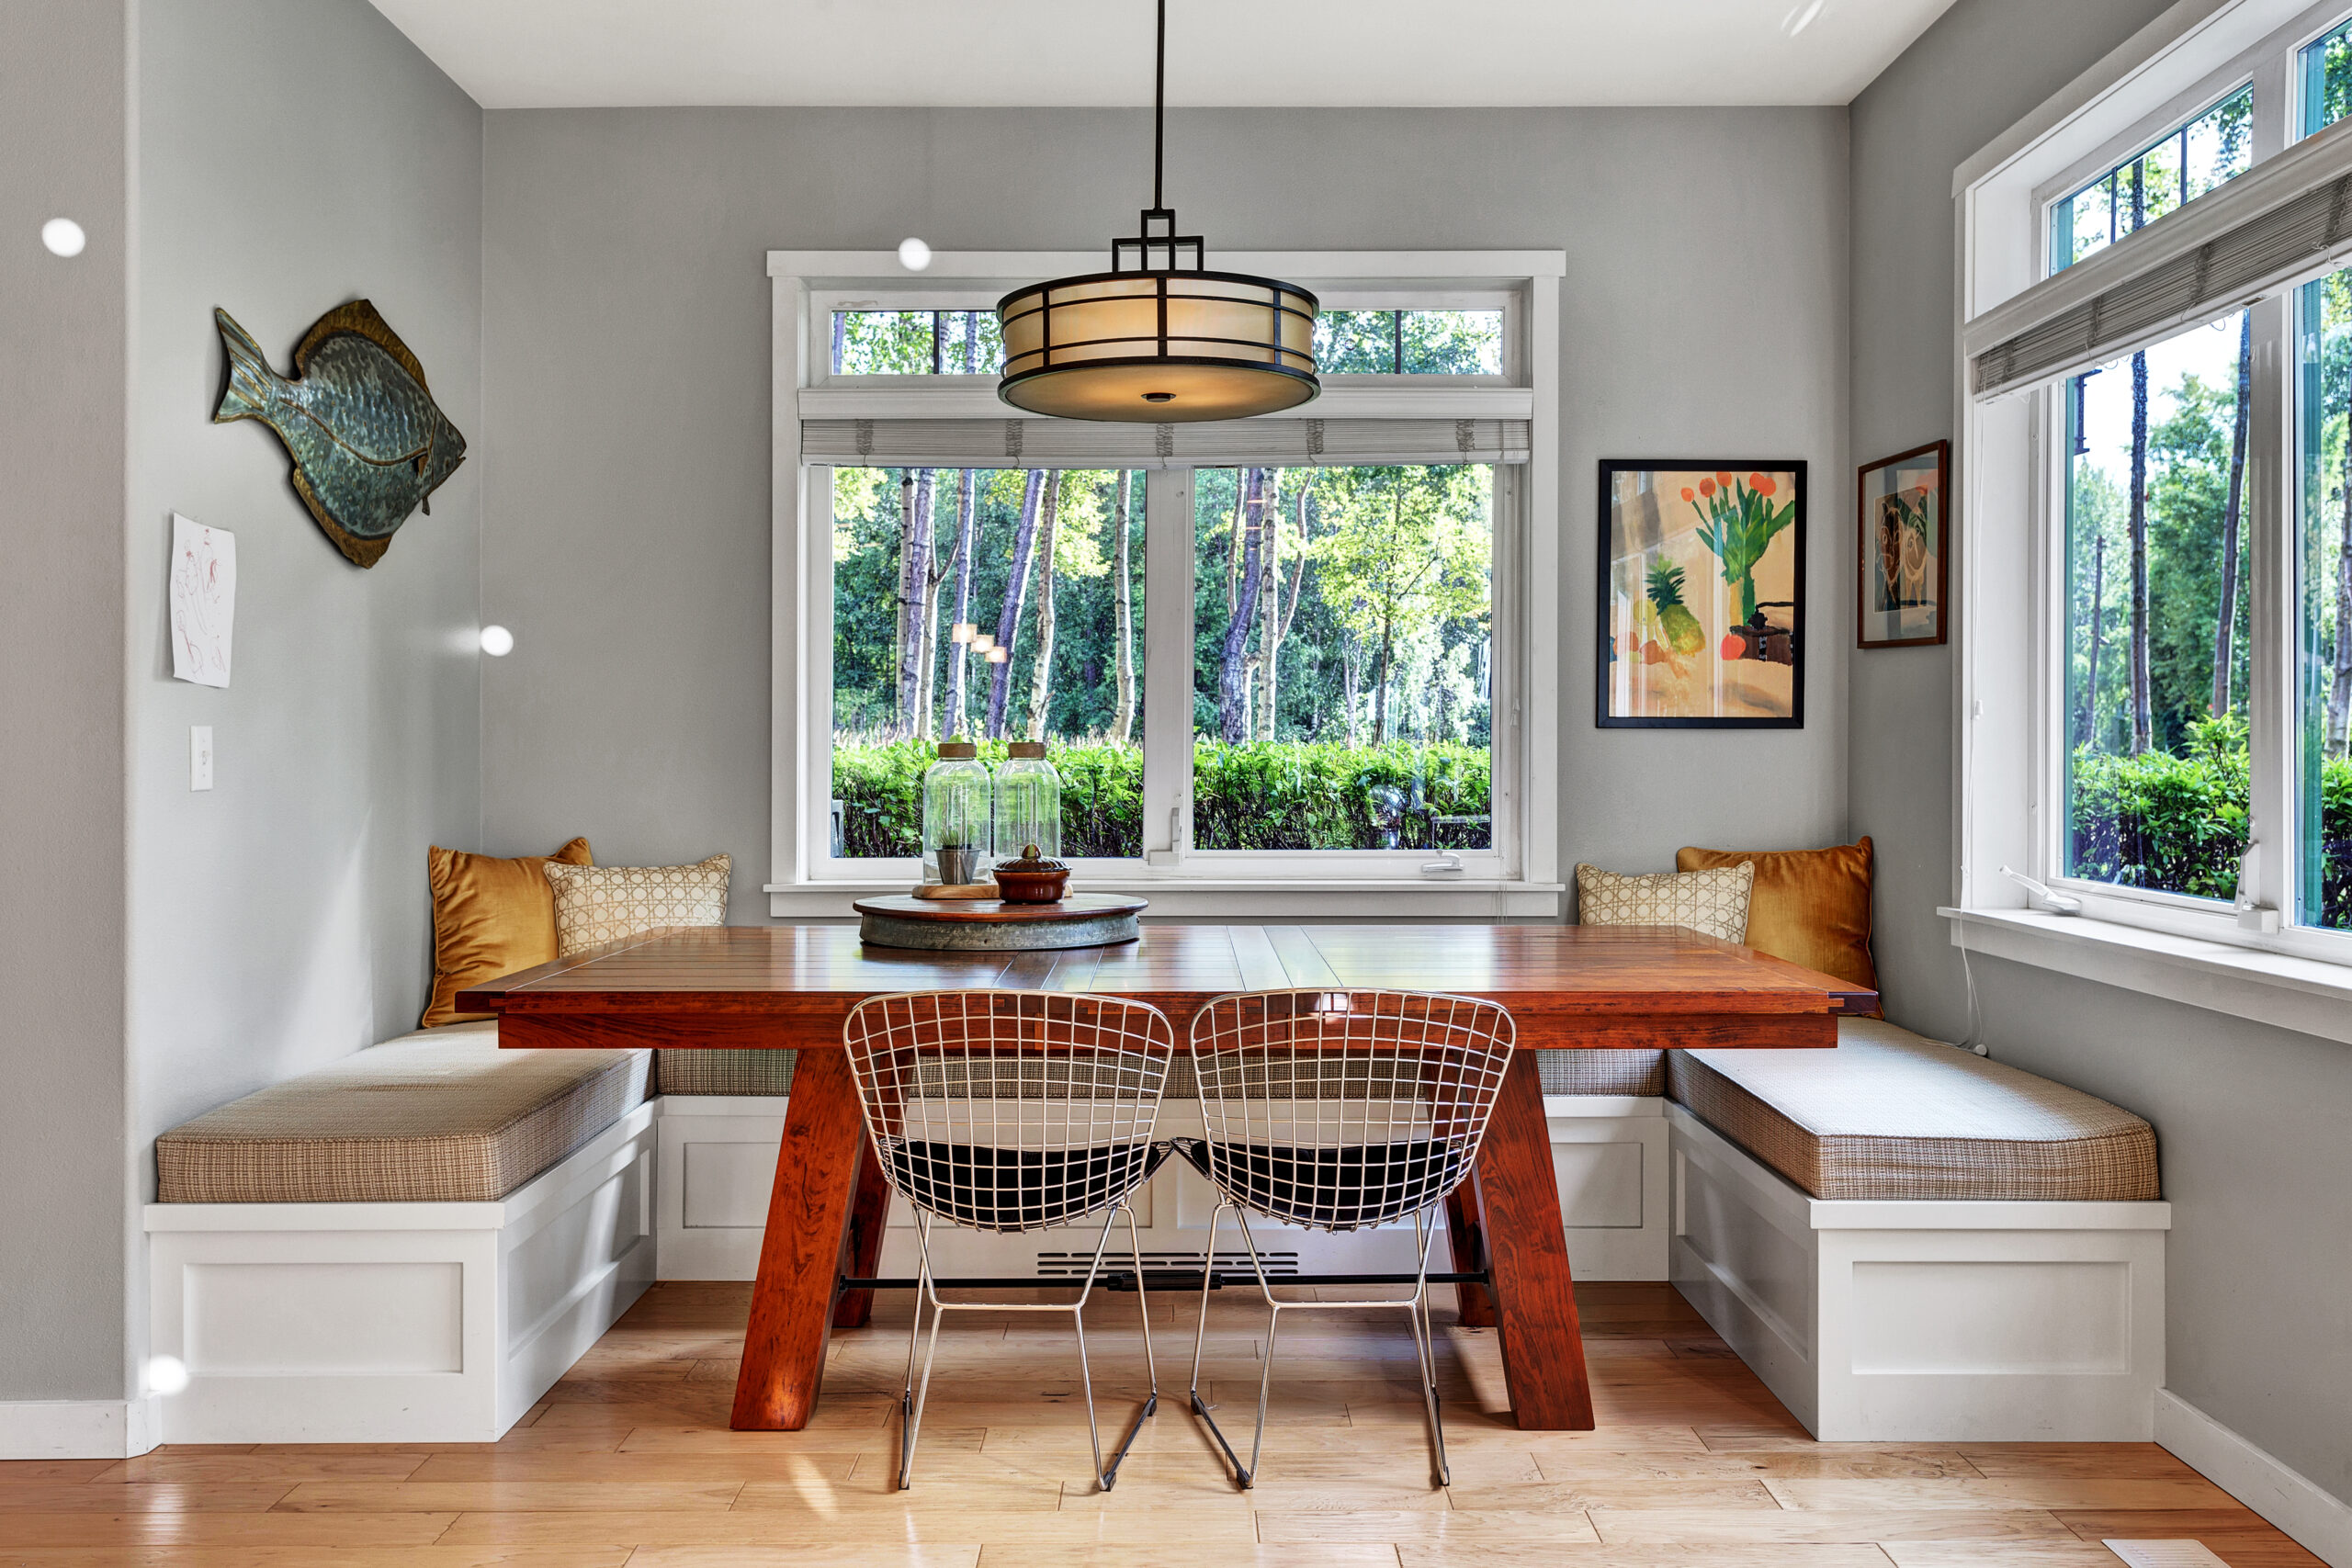 A contemporary kitchen nook and wooden dining table.  Banquette seating and large windows provide a cozy home corner for eating and socializing.  